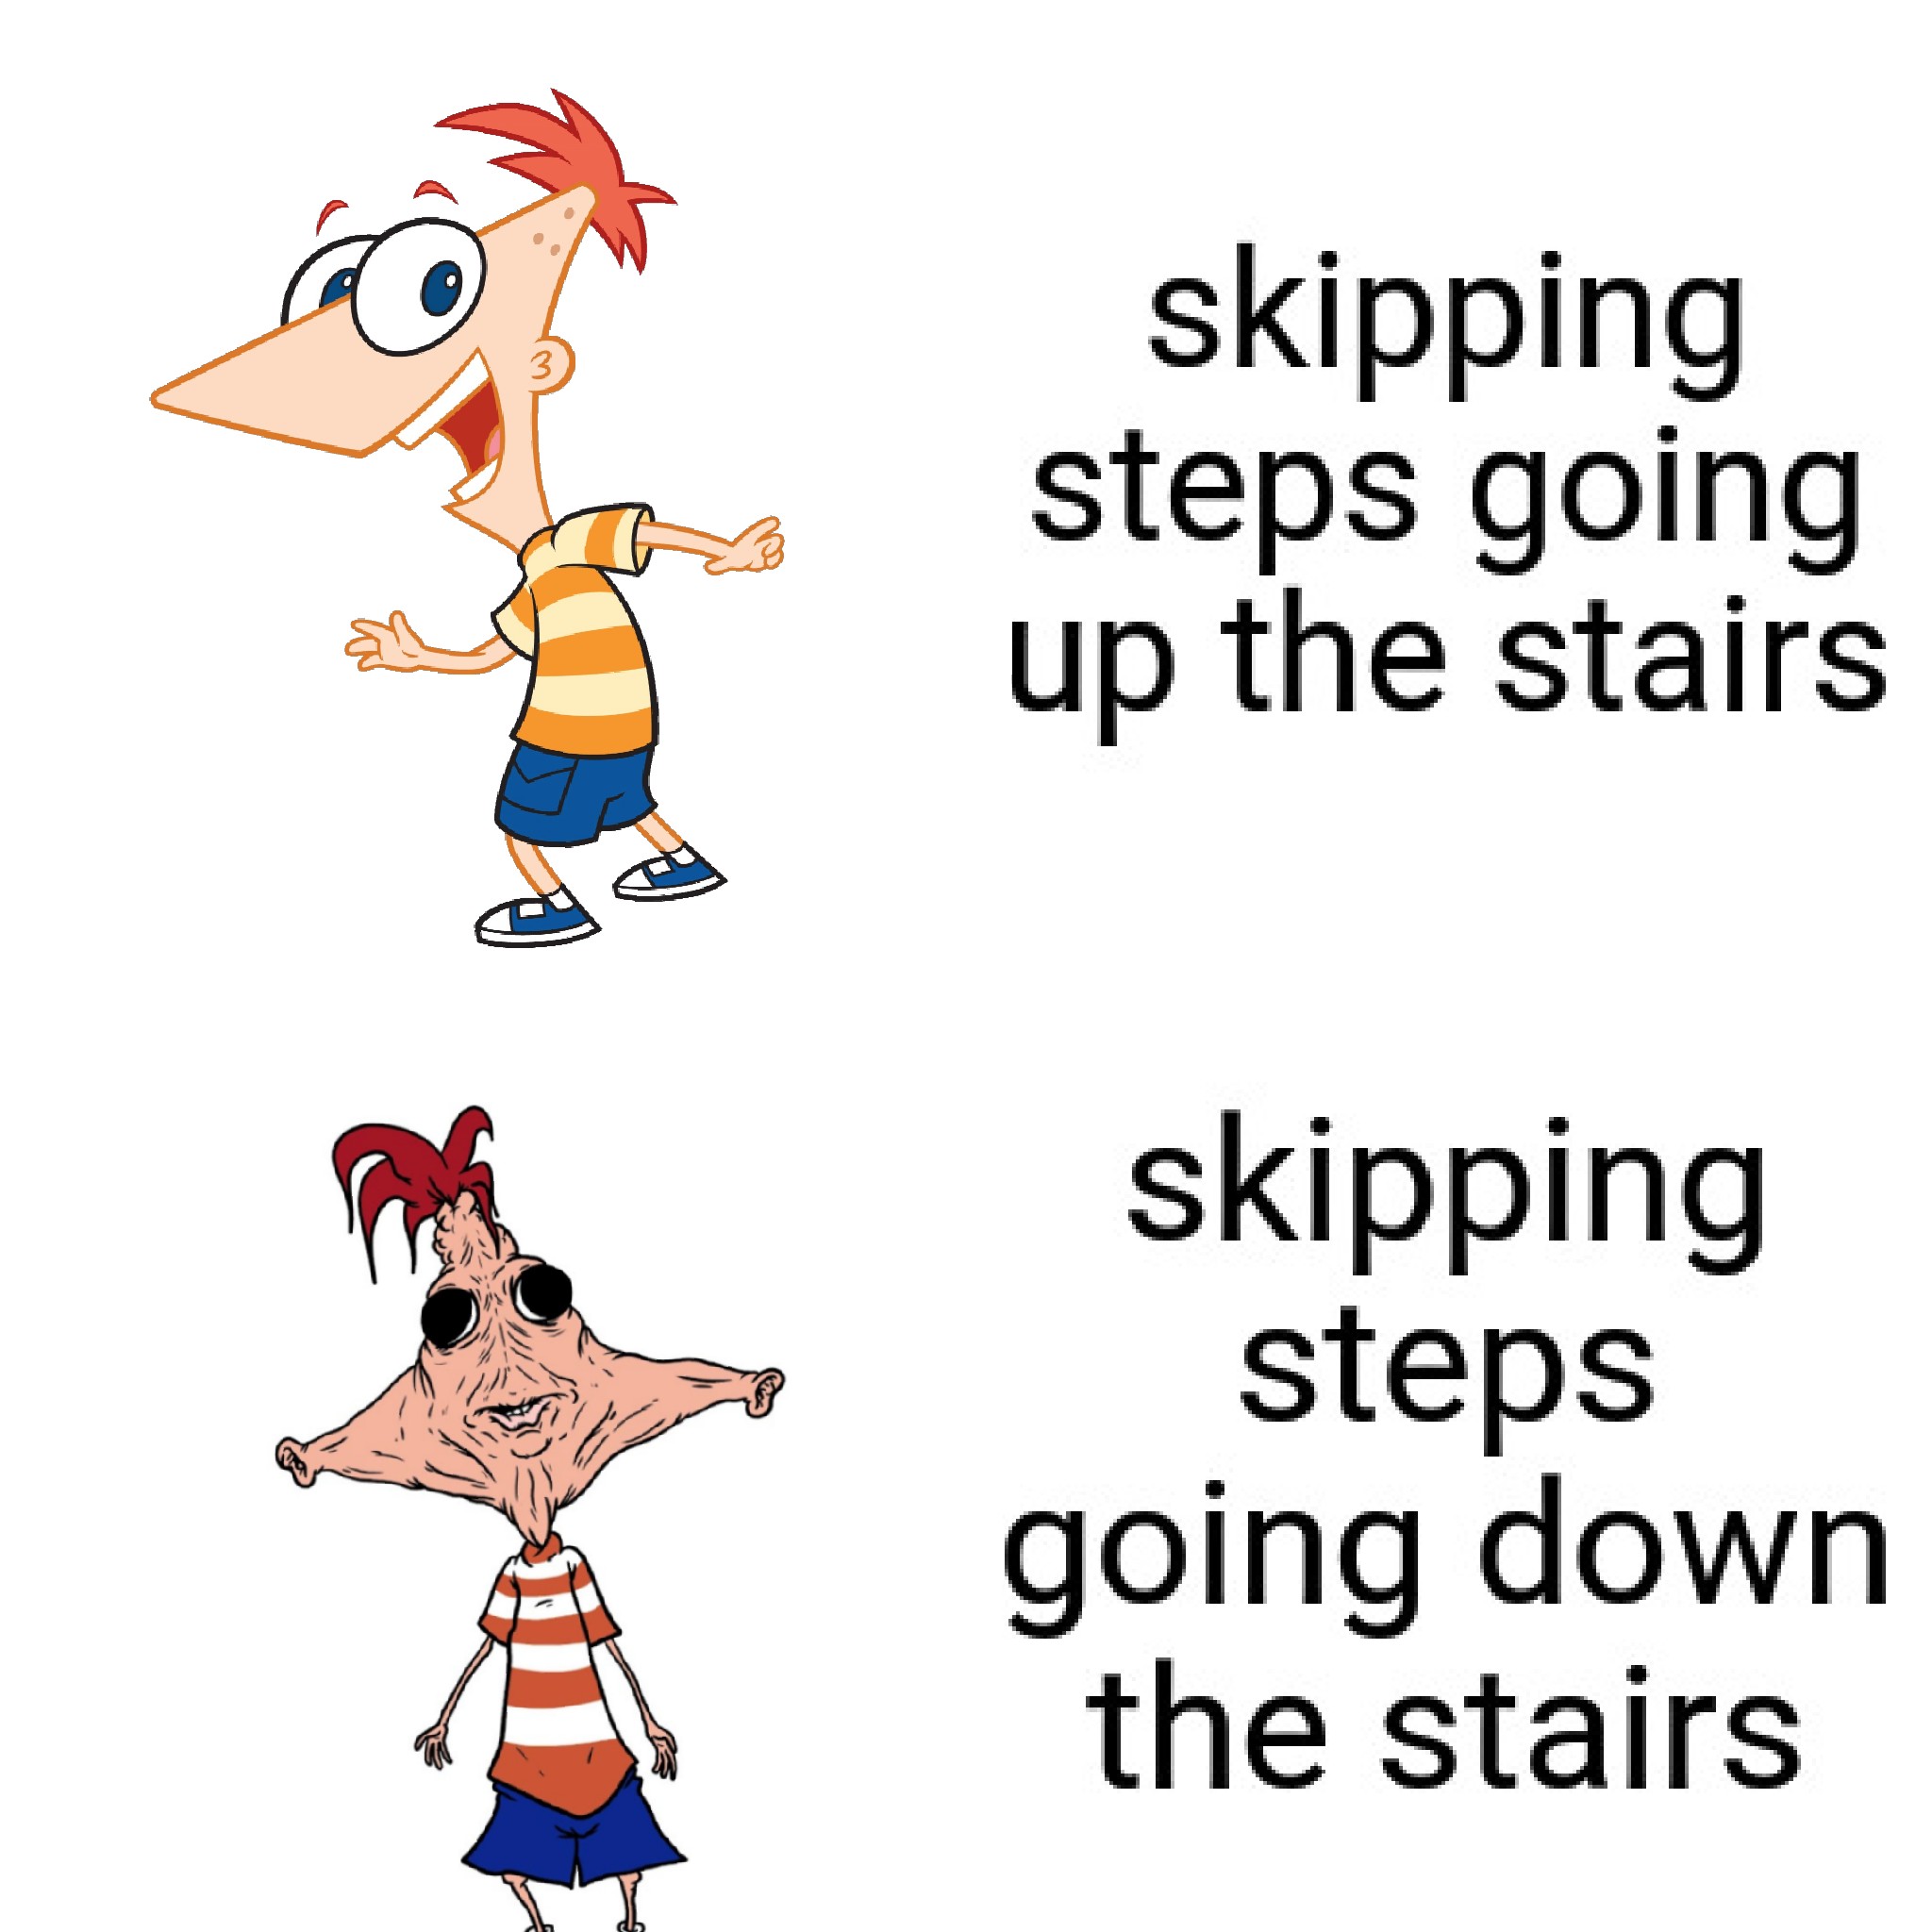 cartoon - 3 skipping steps going up the stairs skipping steps going down the stairs